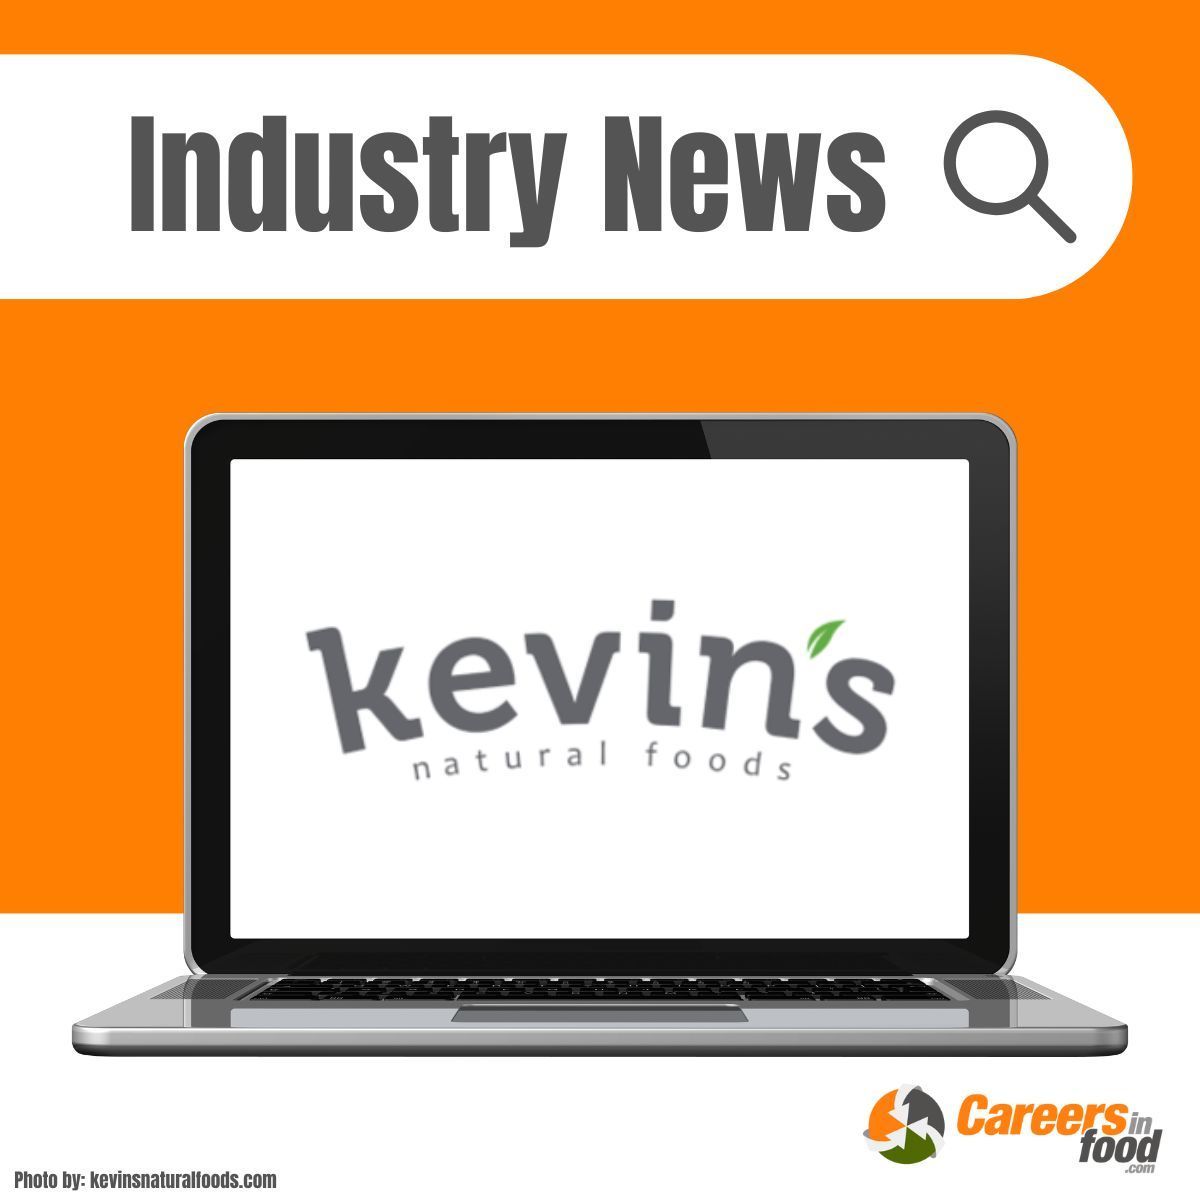 Roxanne Bernstein Named Chief Executive Officer of Kevin's Natural Foods!

This transition comes as Kevin's prepares for its next phase of growth following its recent acquisition by Mars, Inc.

Explore Bernstein plans at the helm: careersinfood.com/career-plannin… 

#CEO #FoodIndustry